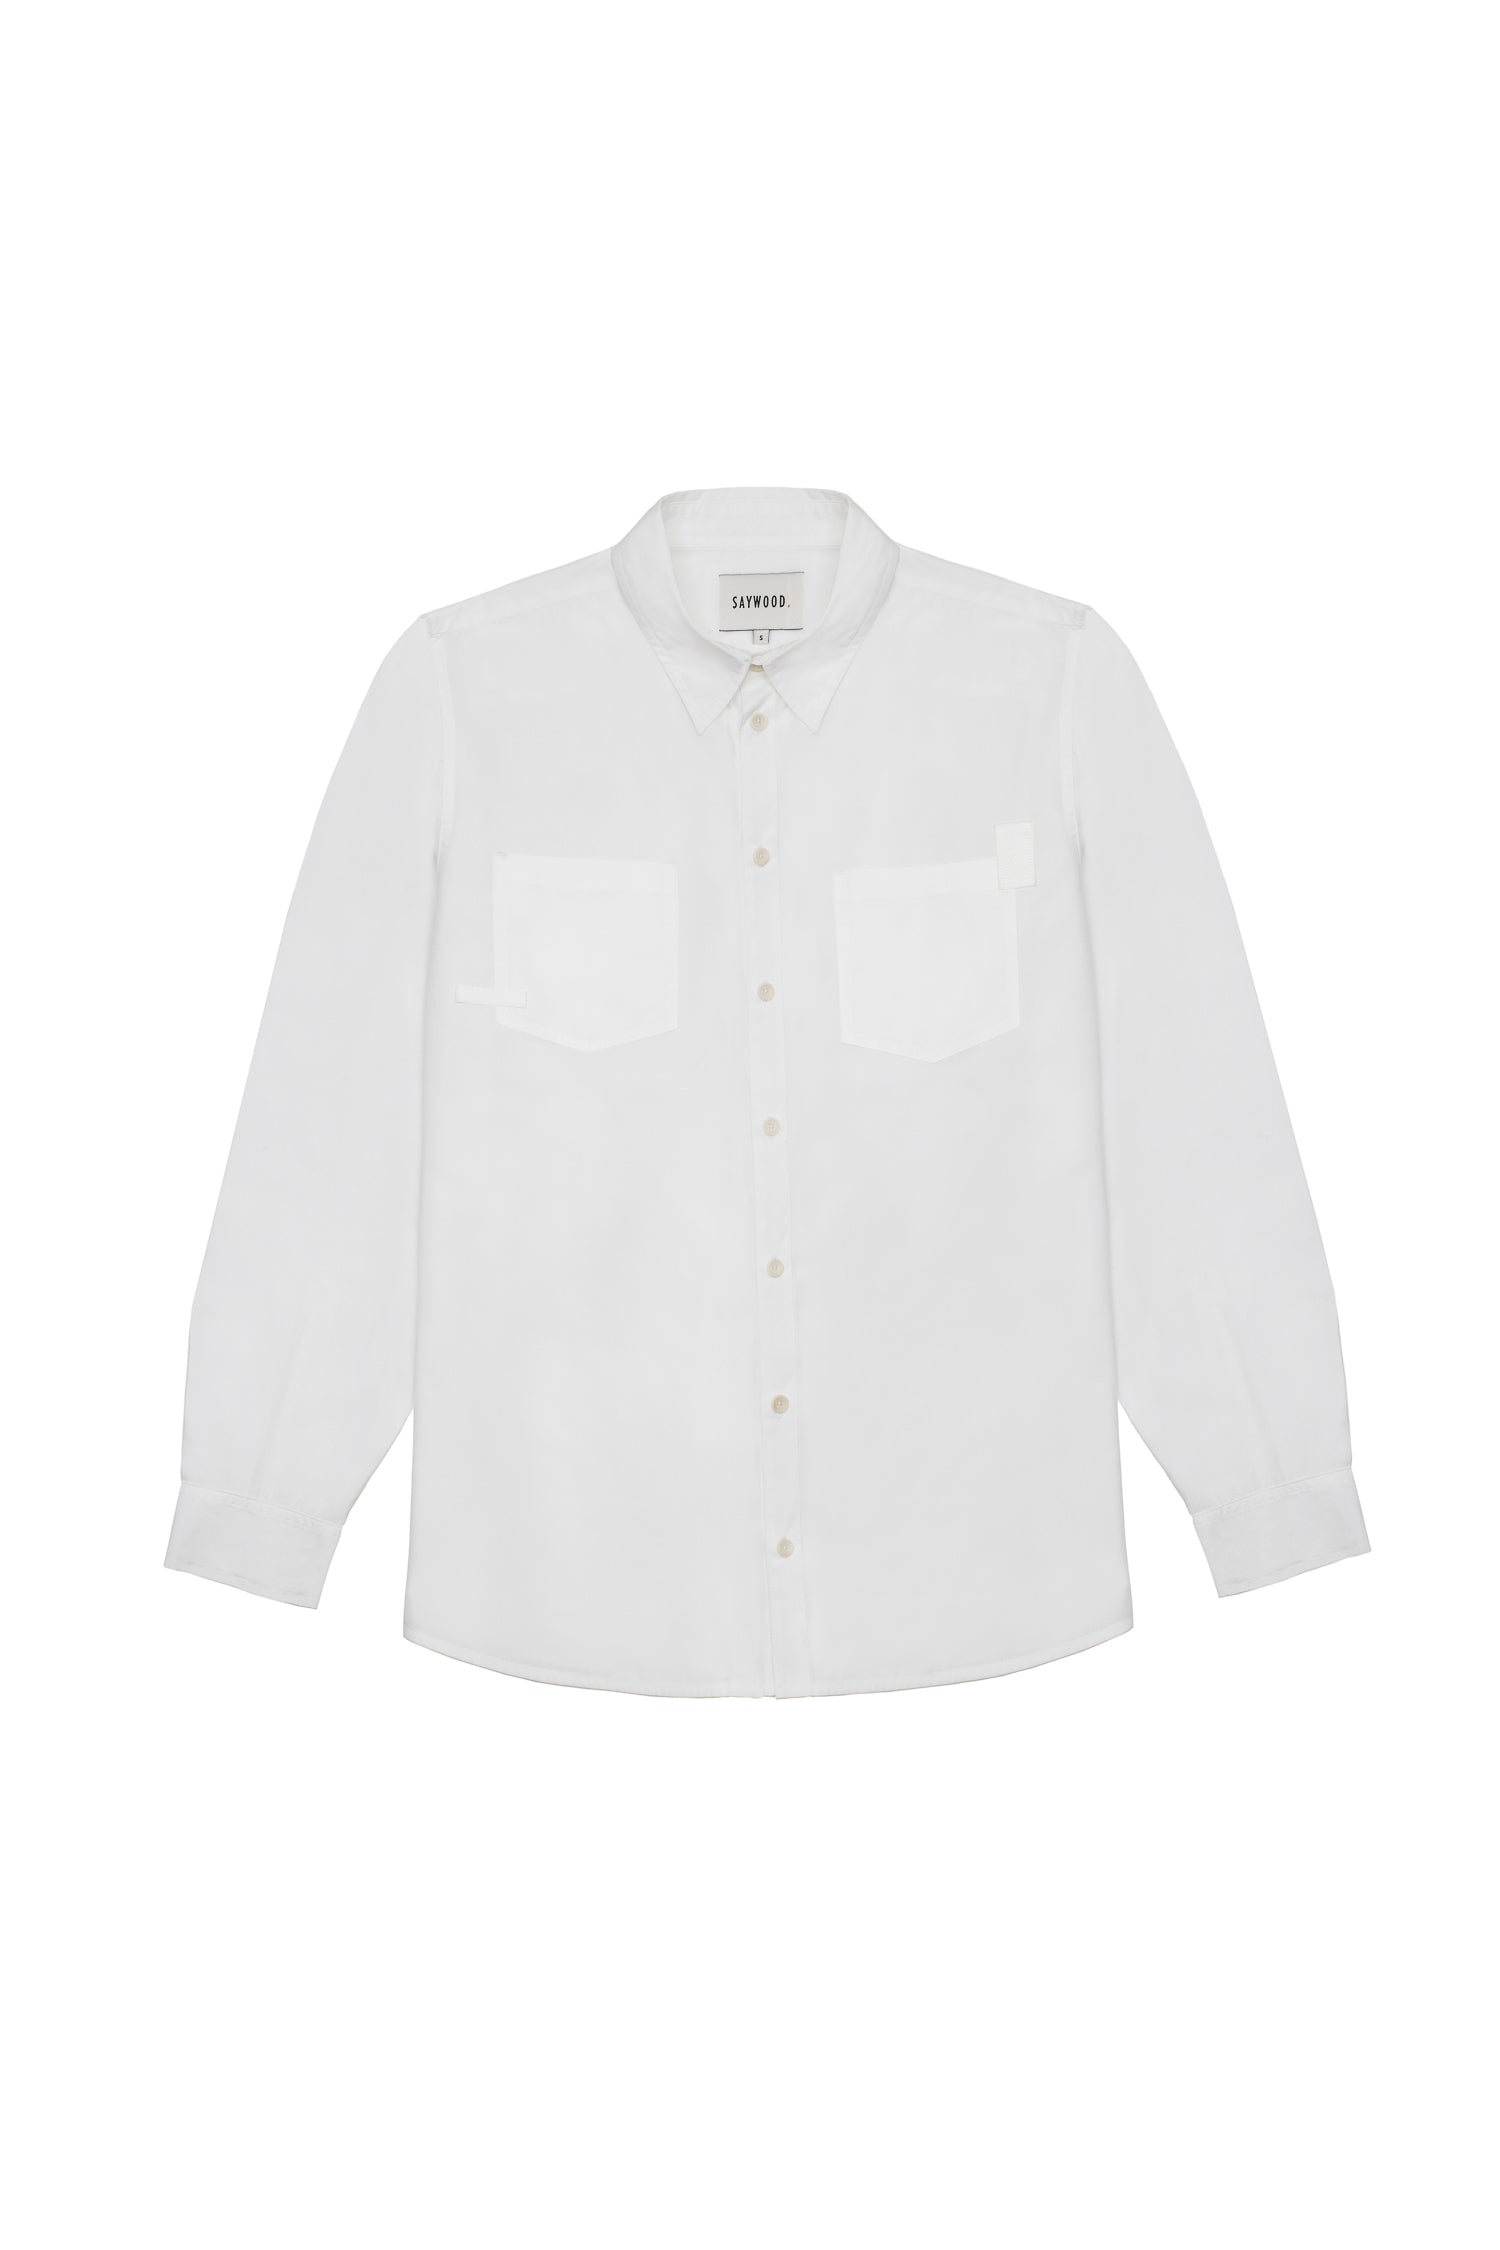 Product shot of Saywood's Eddy mens white shirt with patch pockets